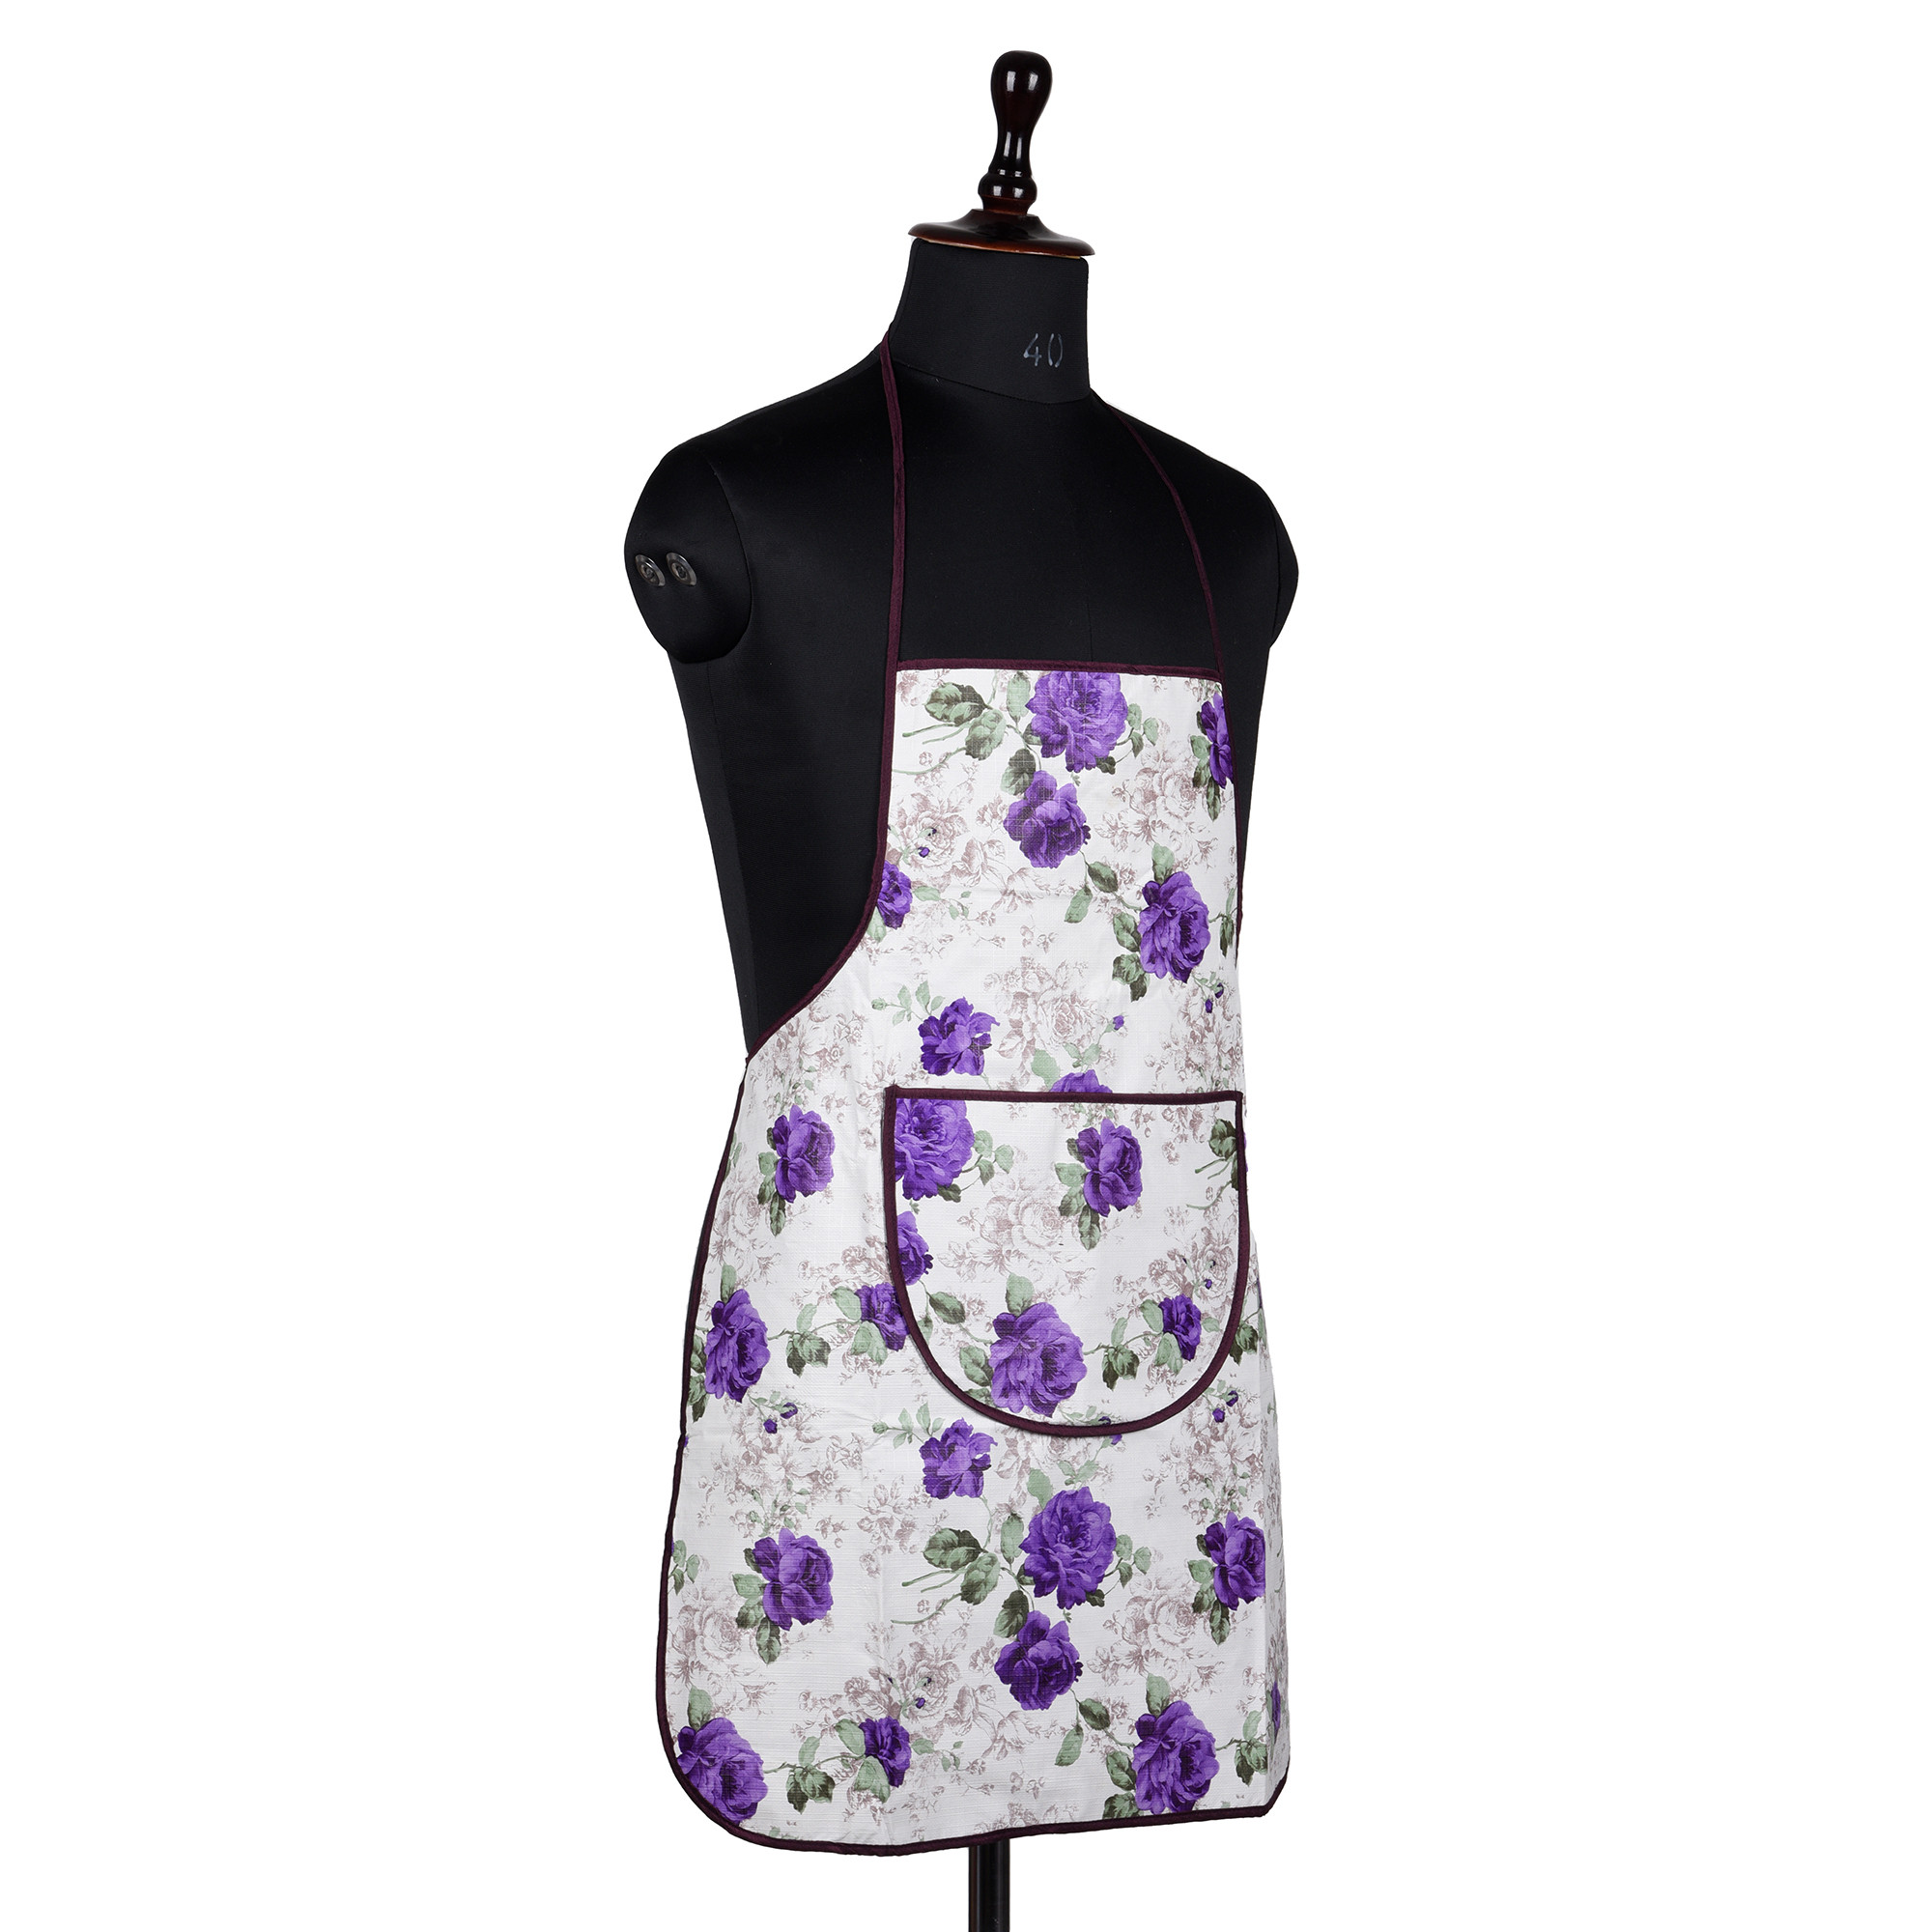 Kuber Industries Apron | PVC Cooking Kitchen Apron | Apron for Restaurent | Purple Flower Apron for Housewife | Chef Apron with Ties | Center Pocket Apron | White